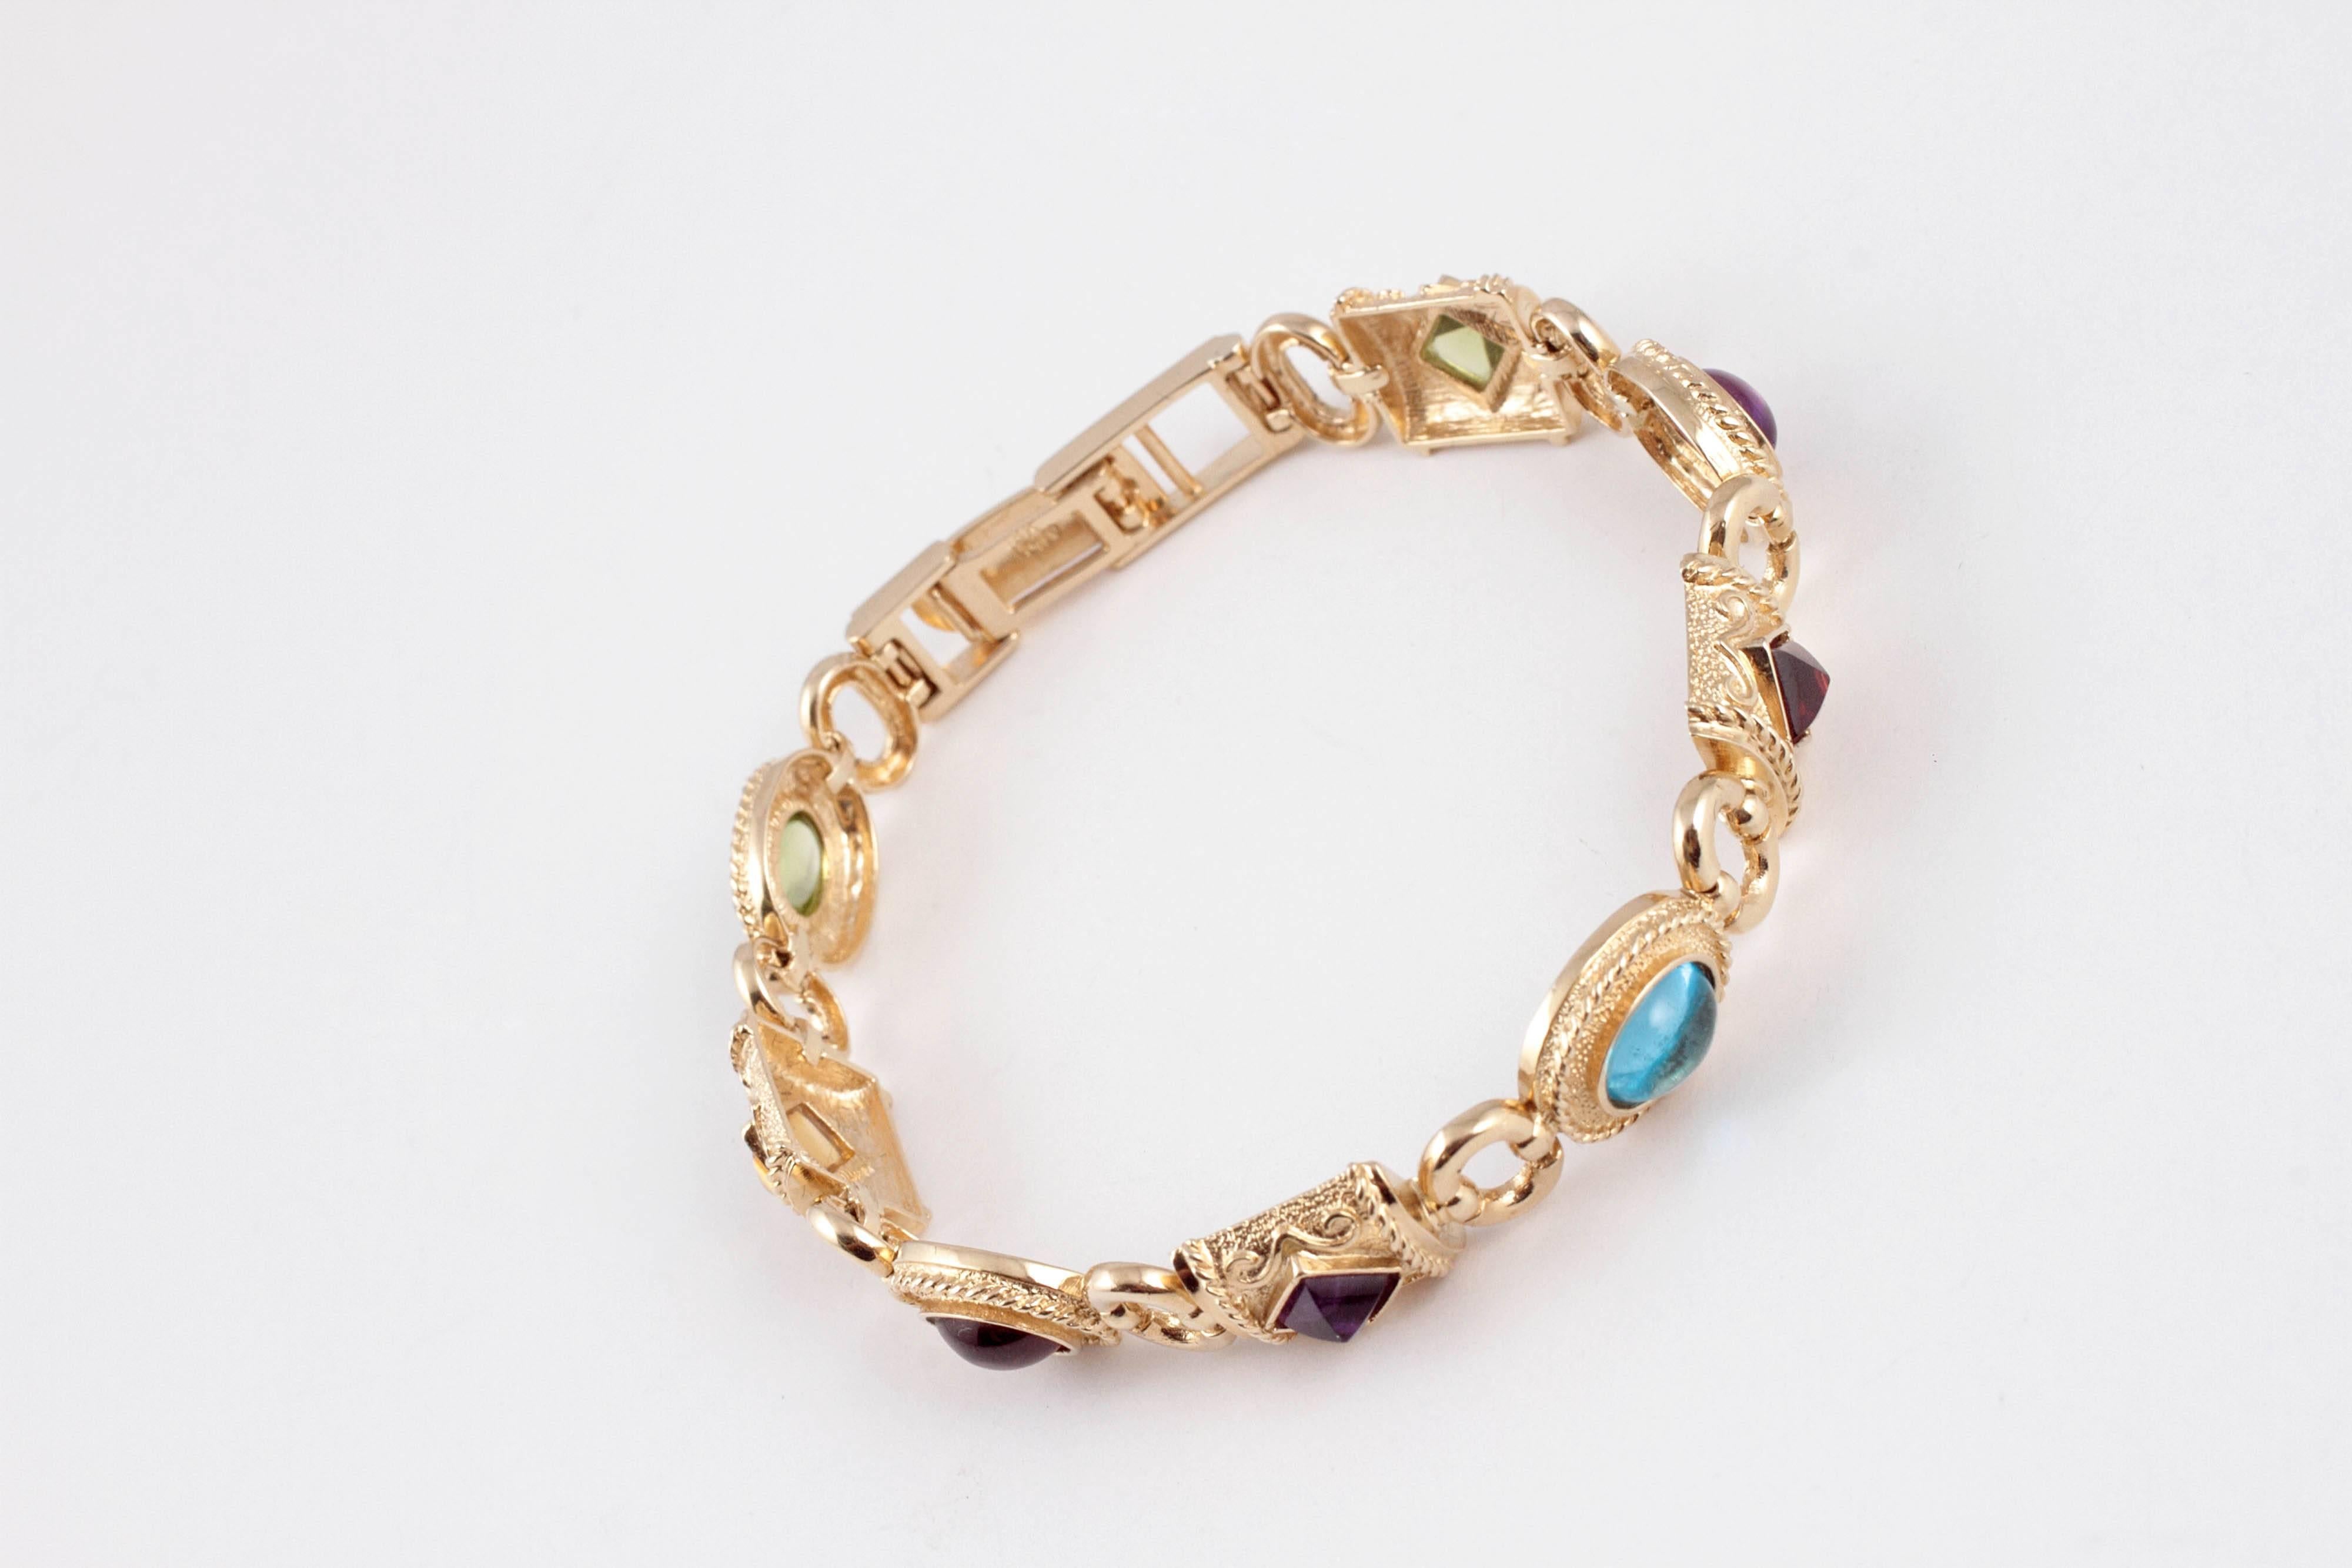 In 14 karat yellow gold, with bezel-set gemstones.  7 inches in length